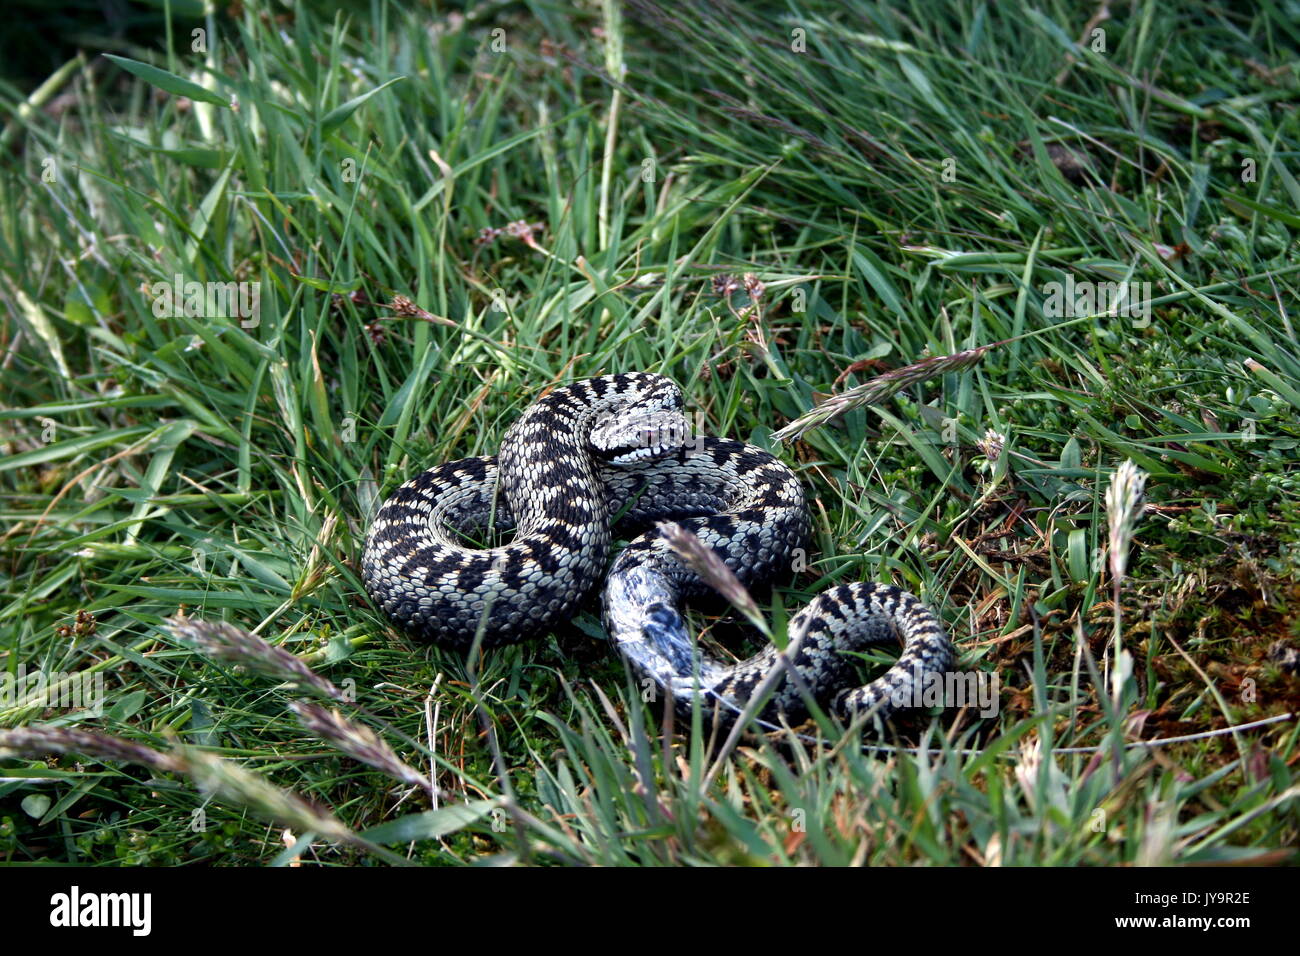 Common European Adder male fitted with radio tracking tag for telemetry project, Vipera berus, on the Malvern Hills, Worcestershire, Herefordshire. UK Stock Photo